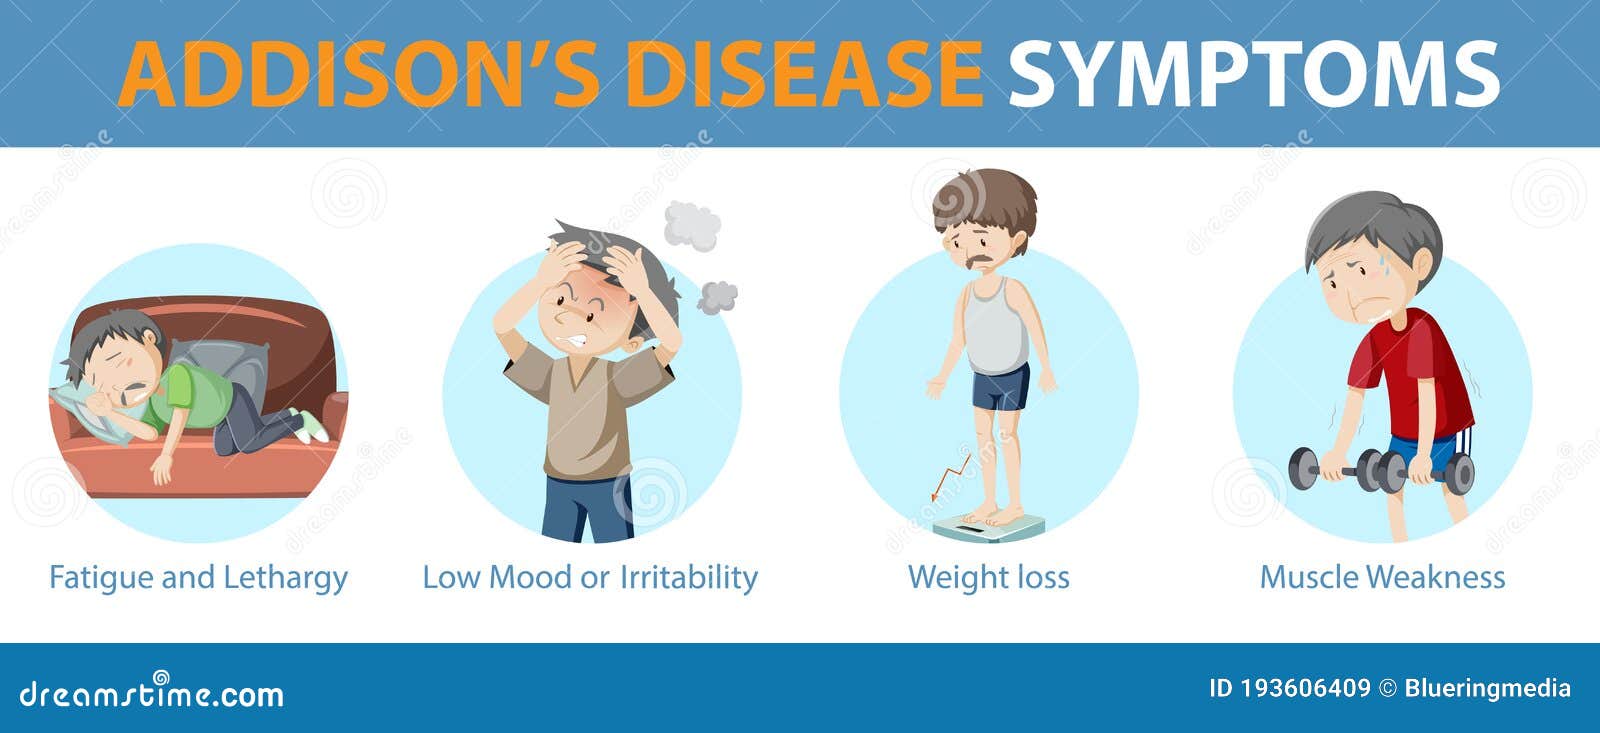 Medical Infographic Of Addison S Disease Symptoms Stock Vector